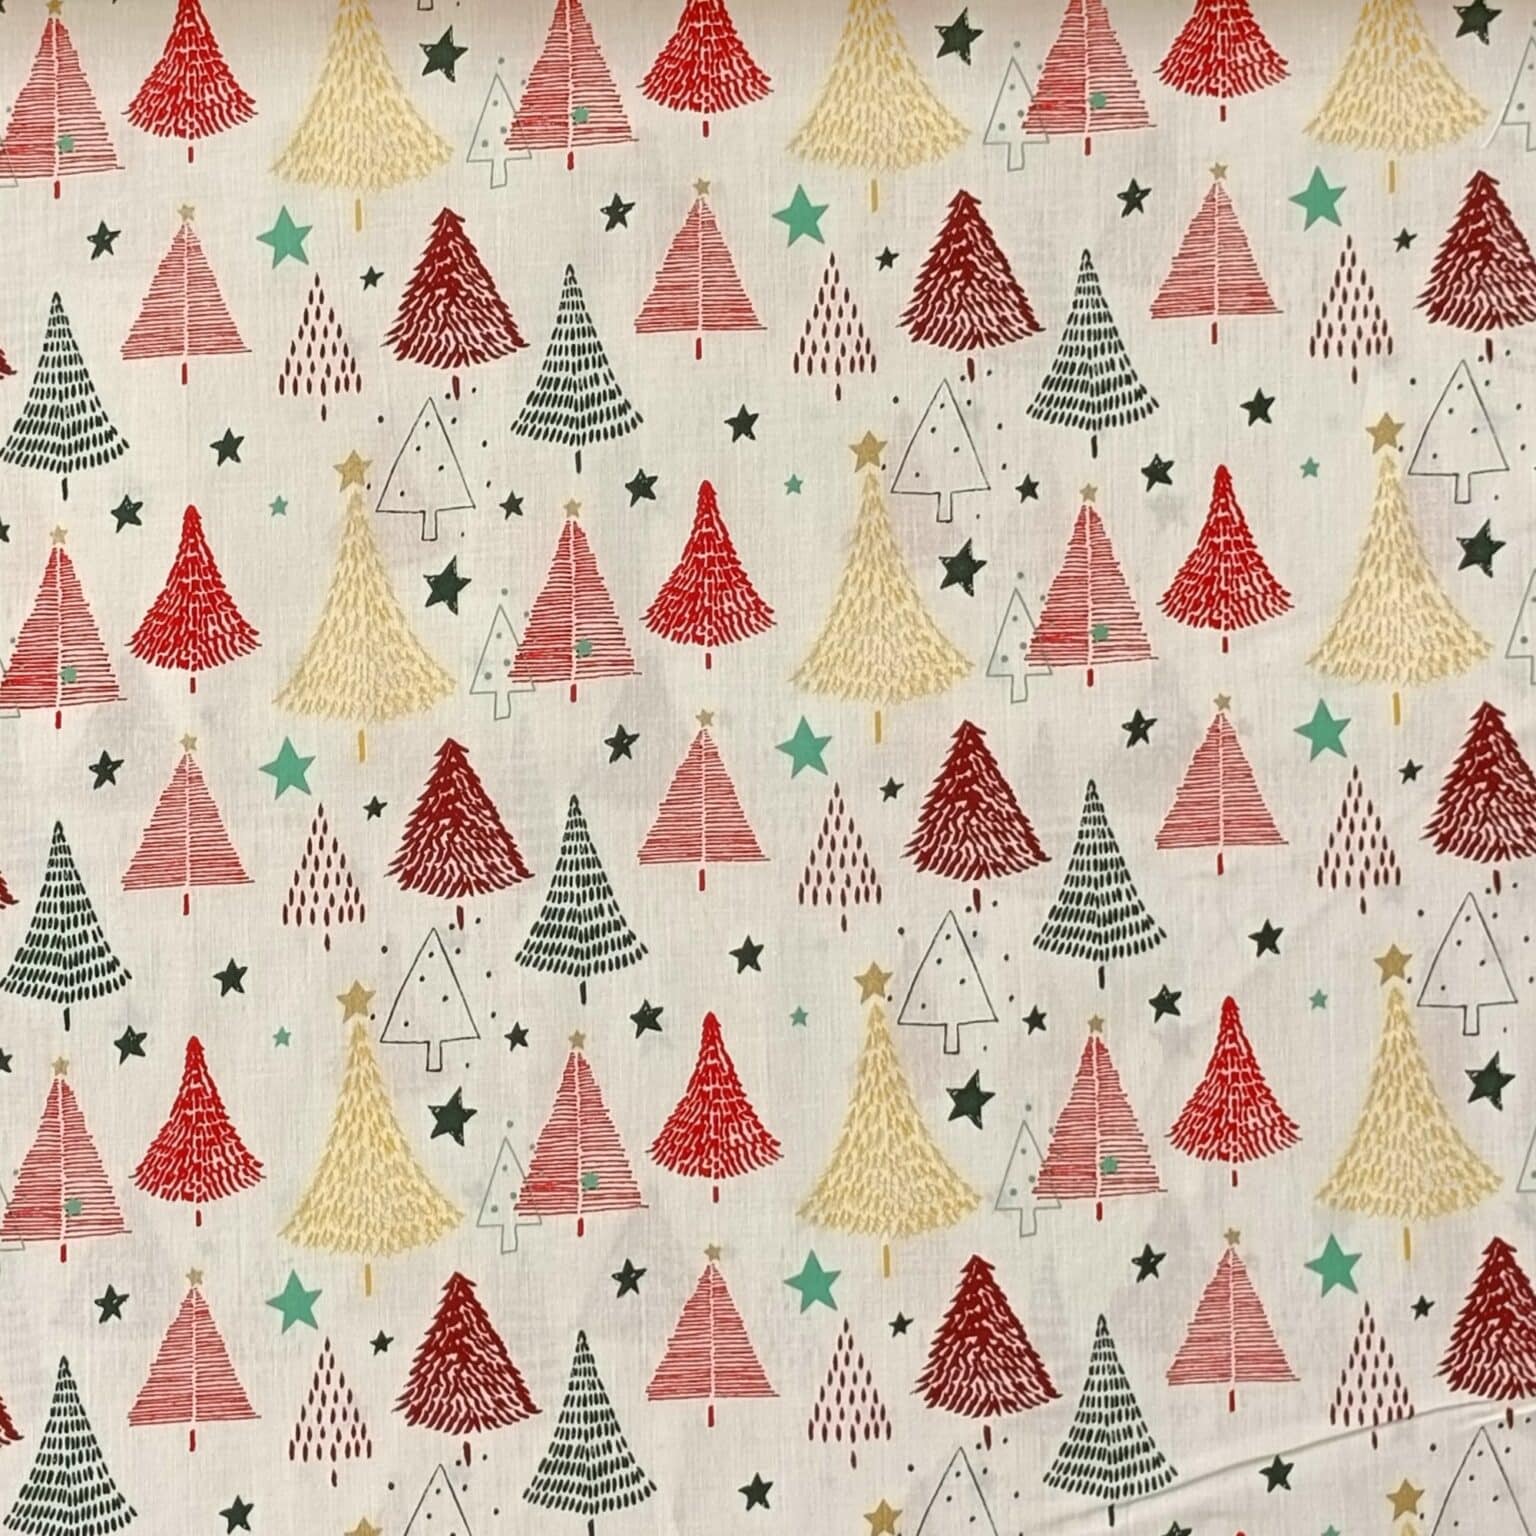 Cotton Fabric - Christmas Tree Swirl - 135cm Wide | More Sewing